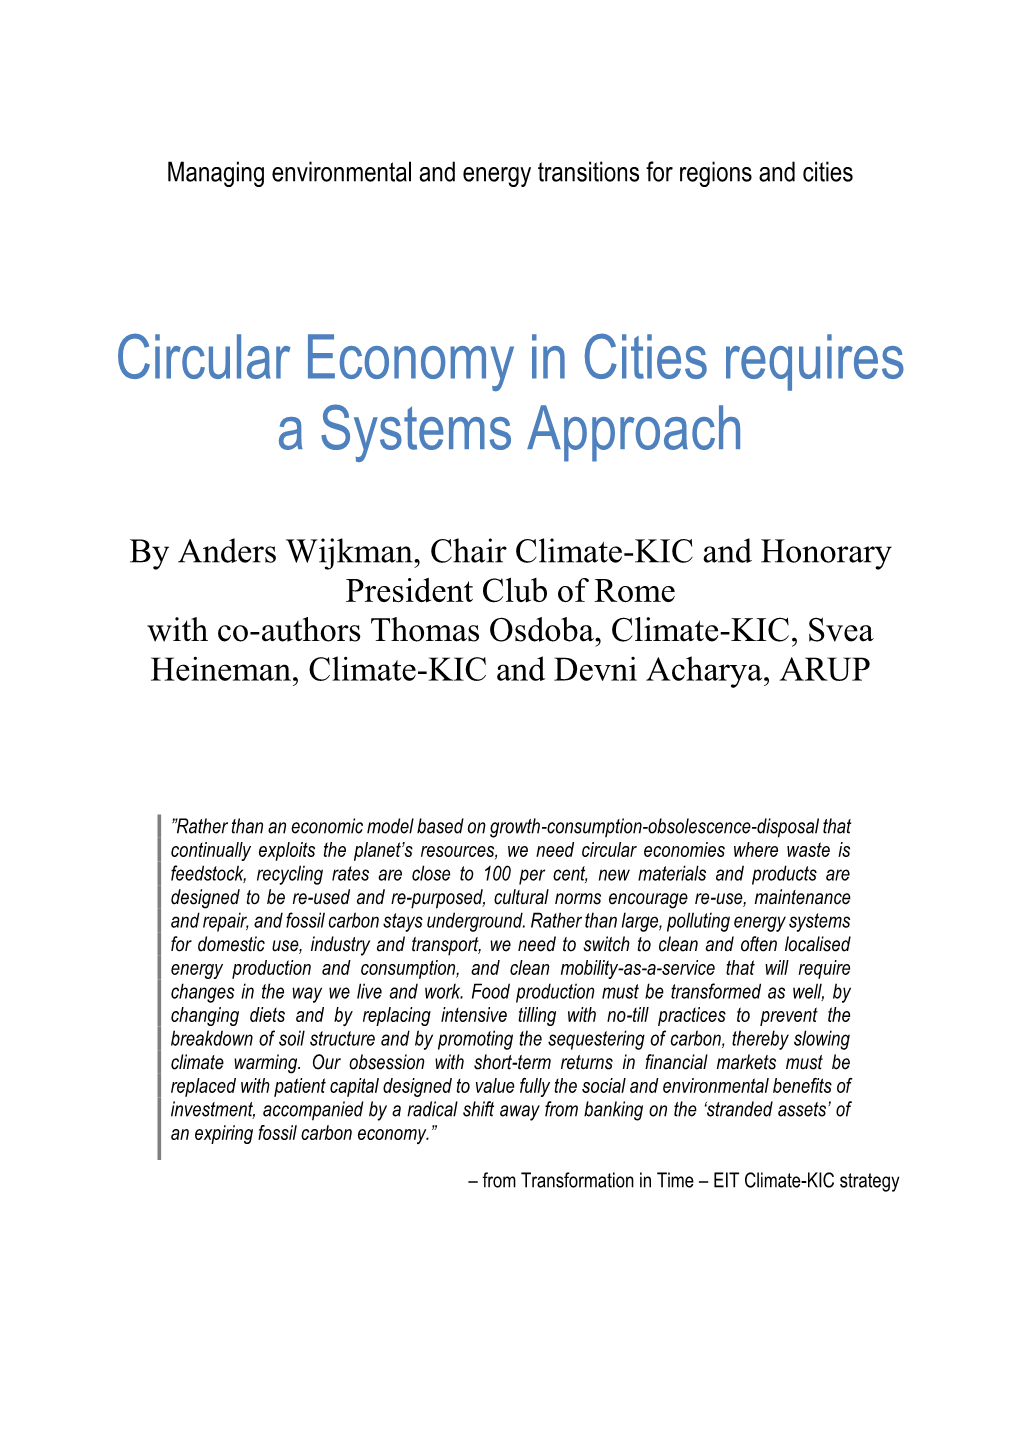 Circular Economy in Cities Requires a Systems Approach